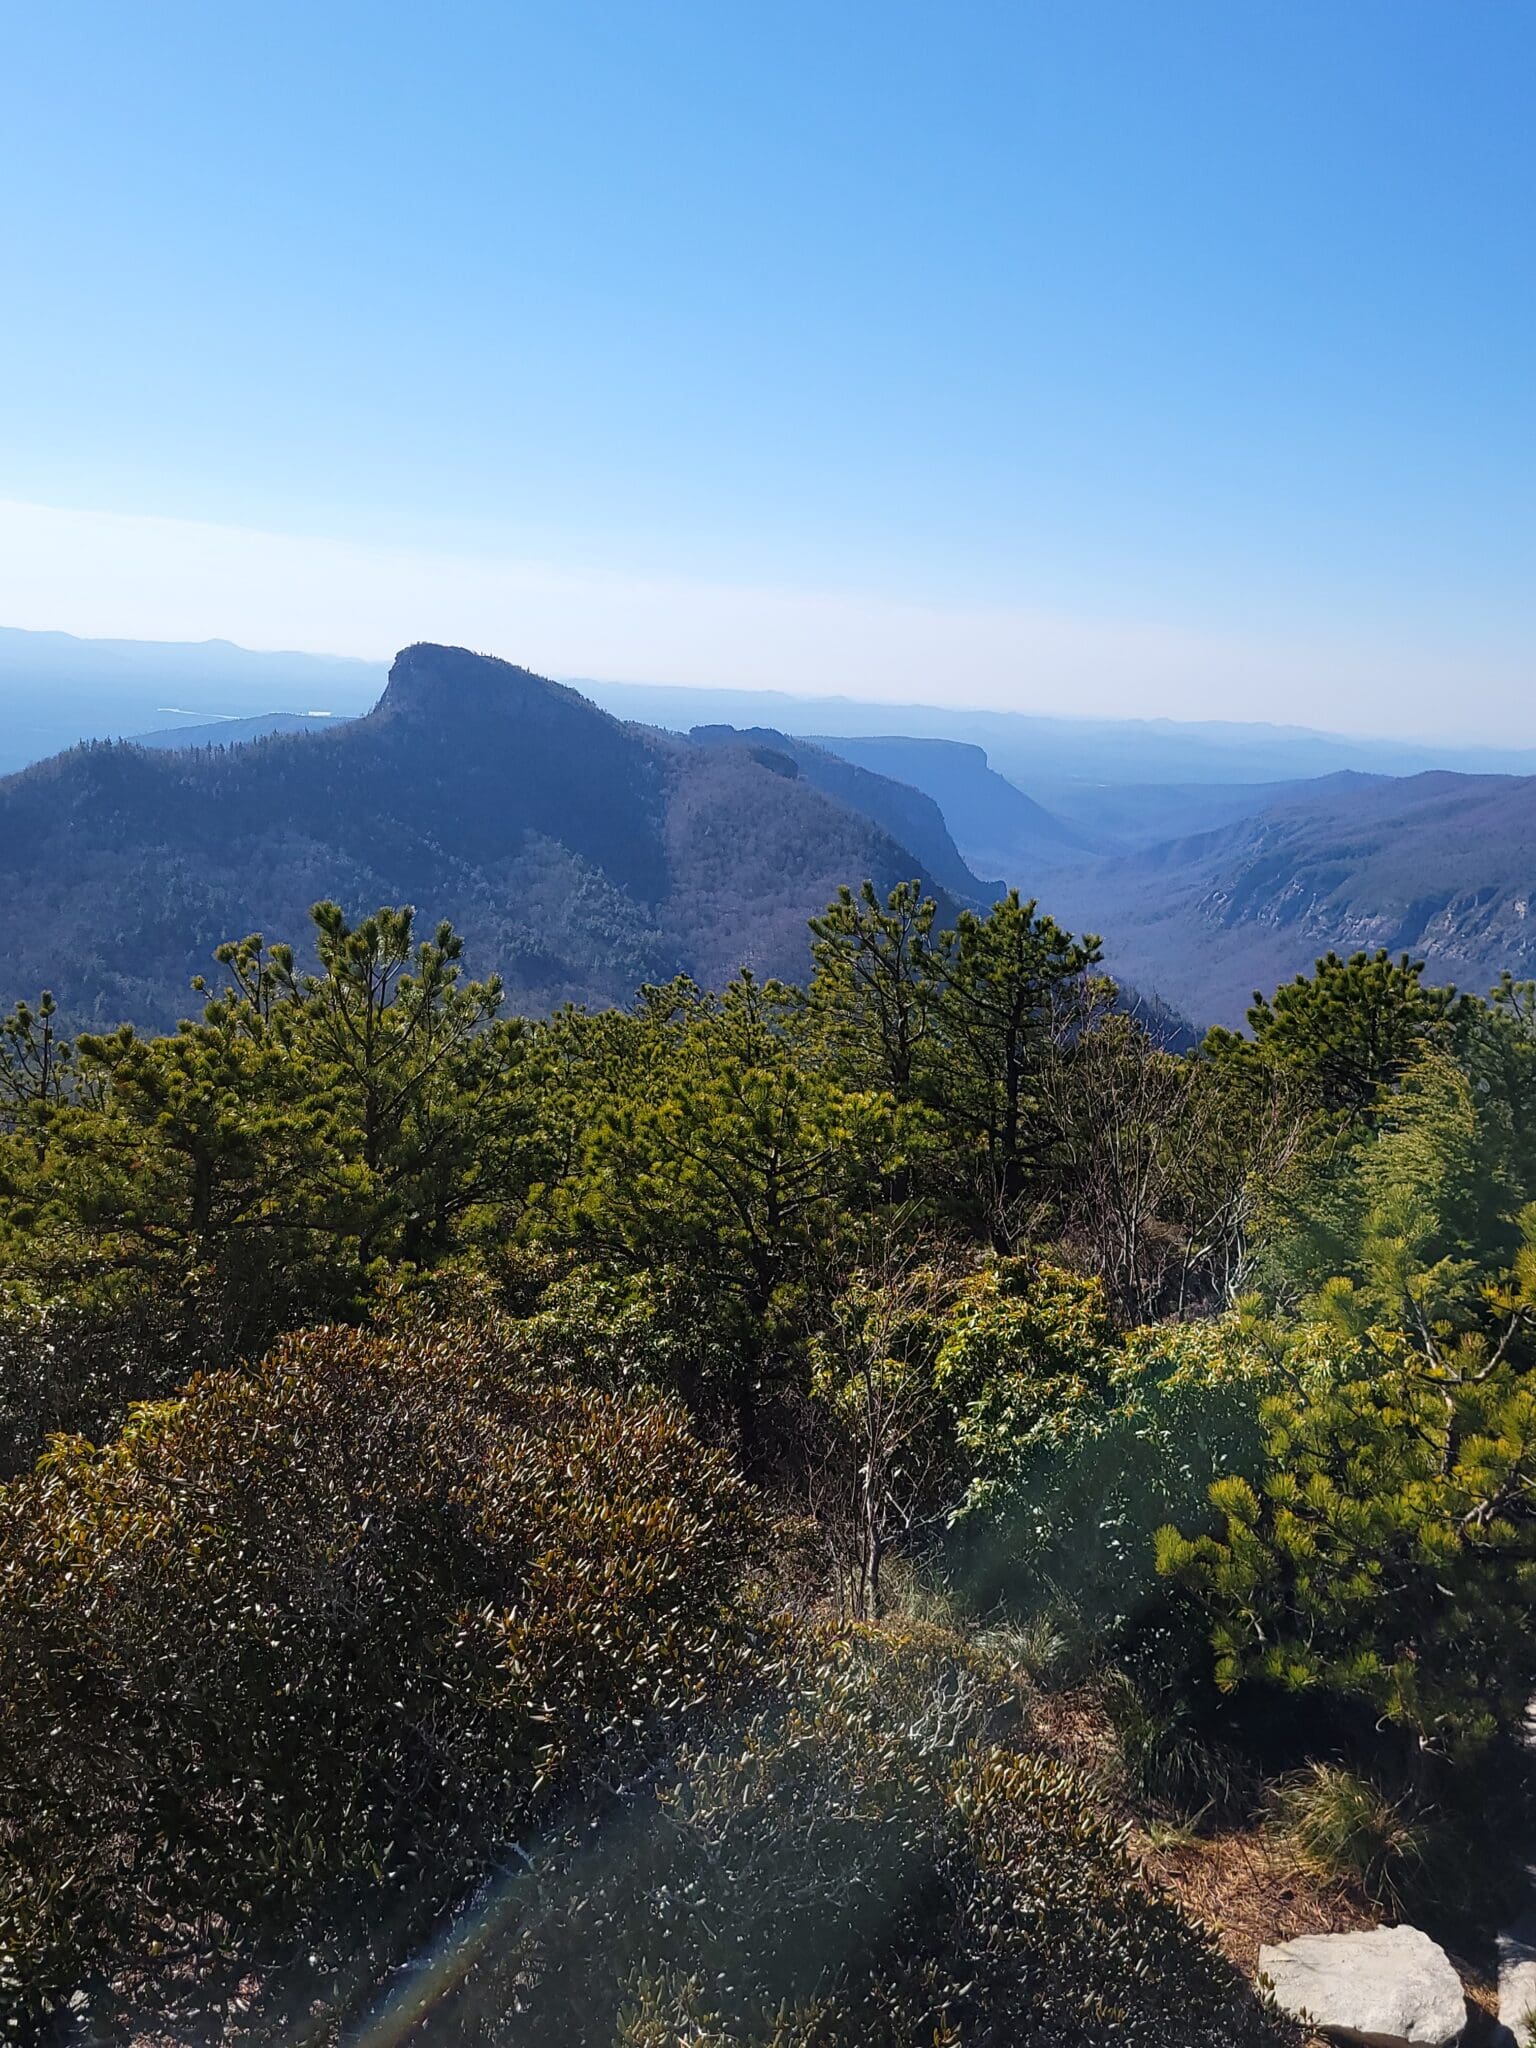 Linville Gorge Wilderness Area NC